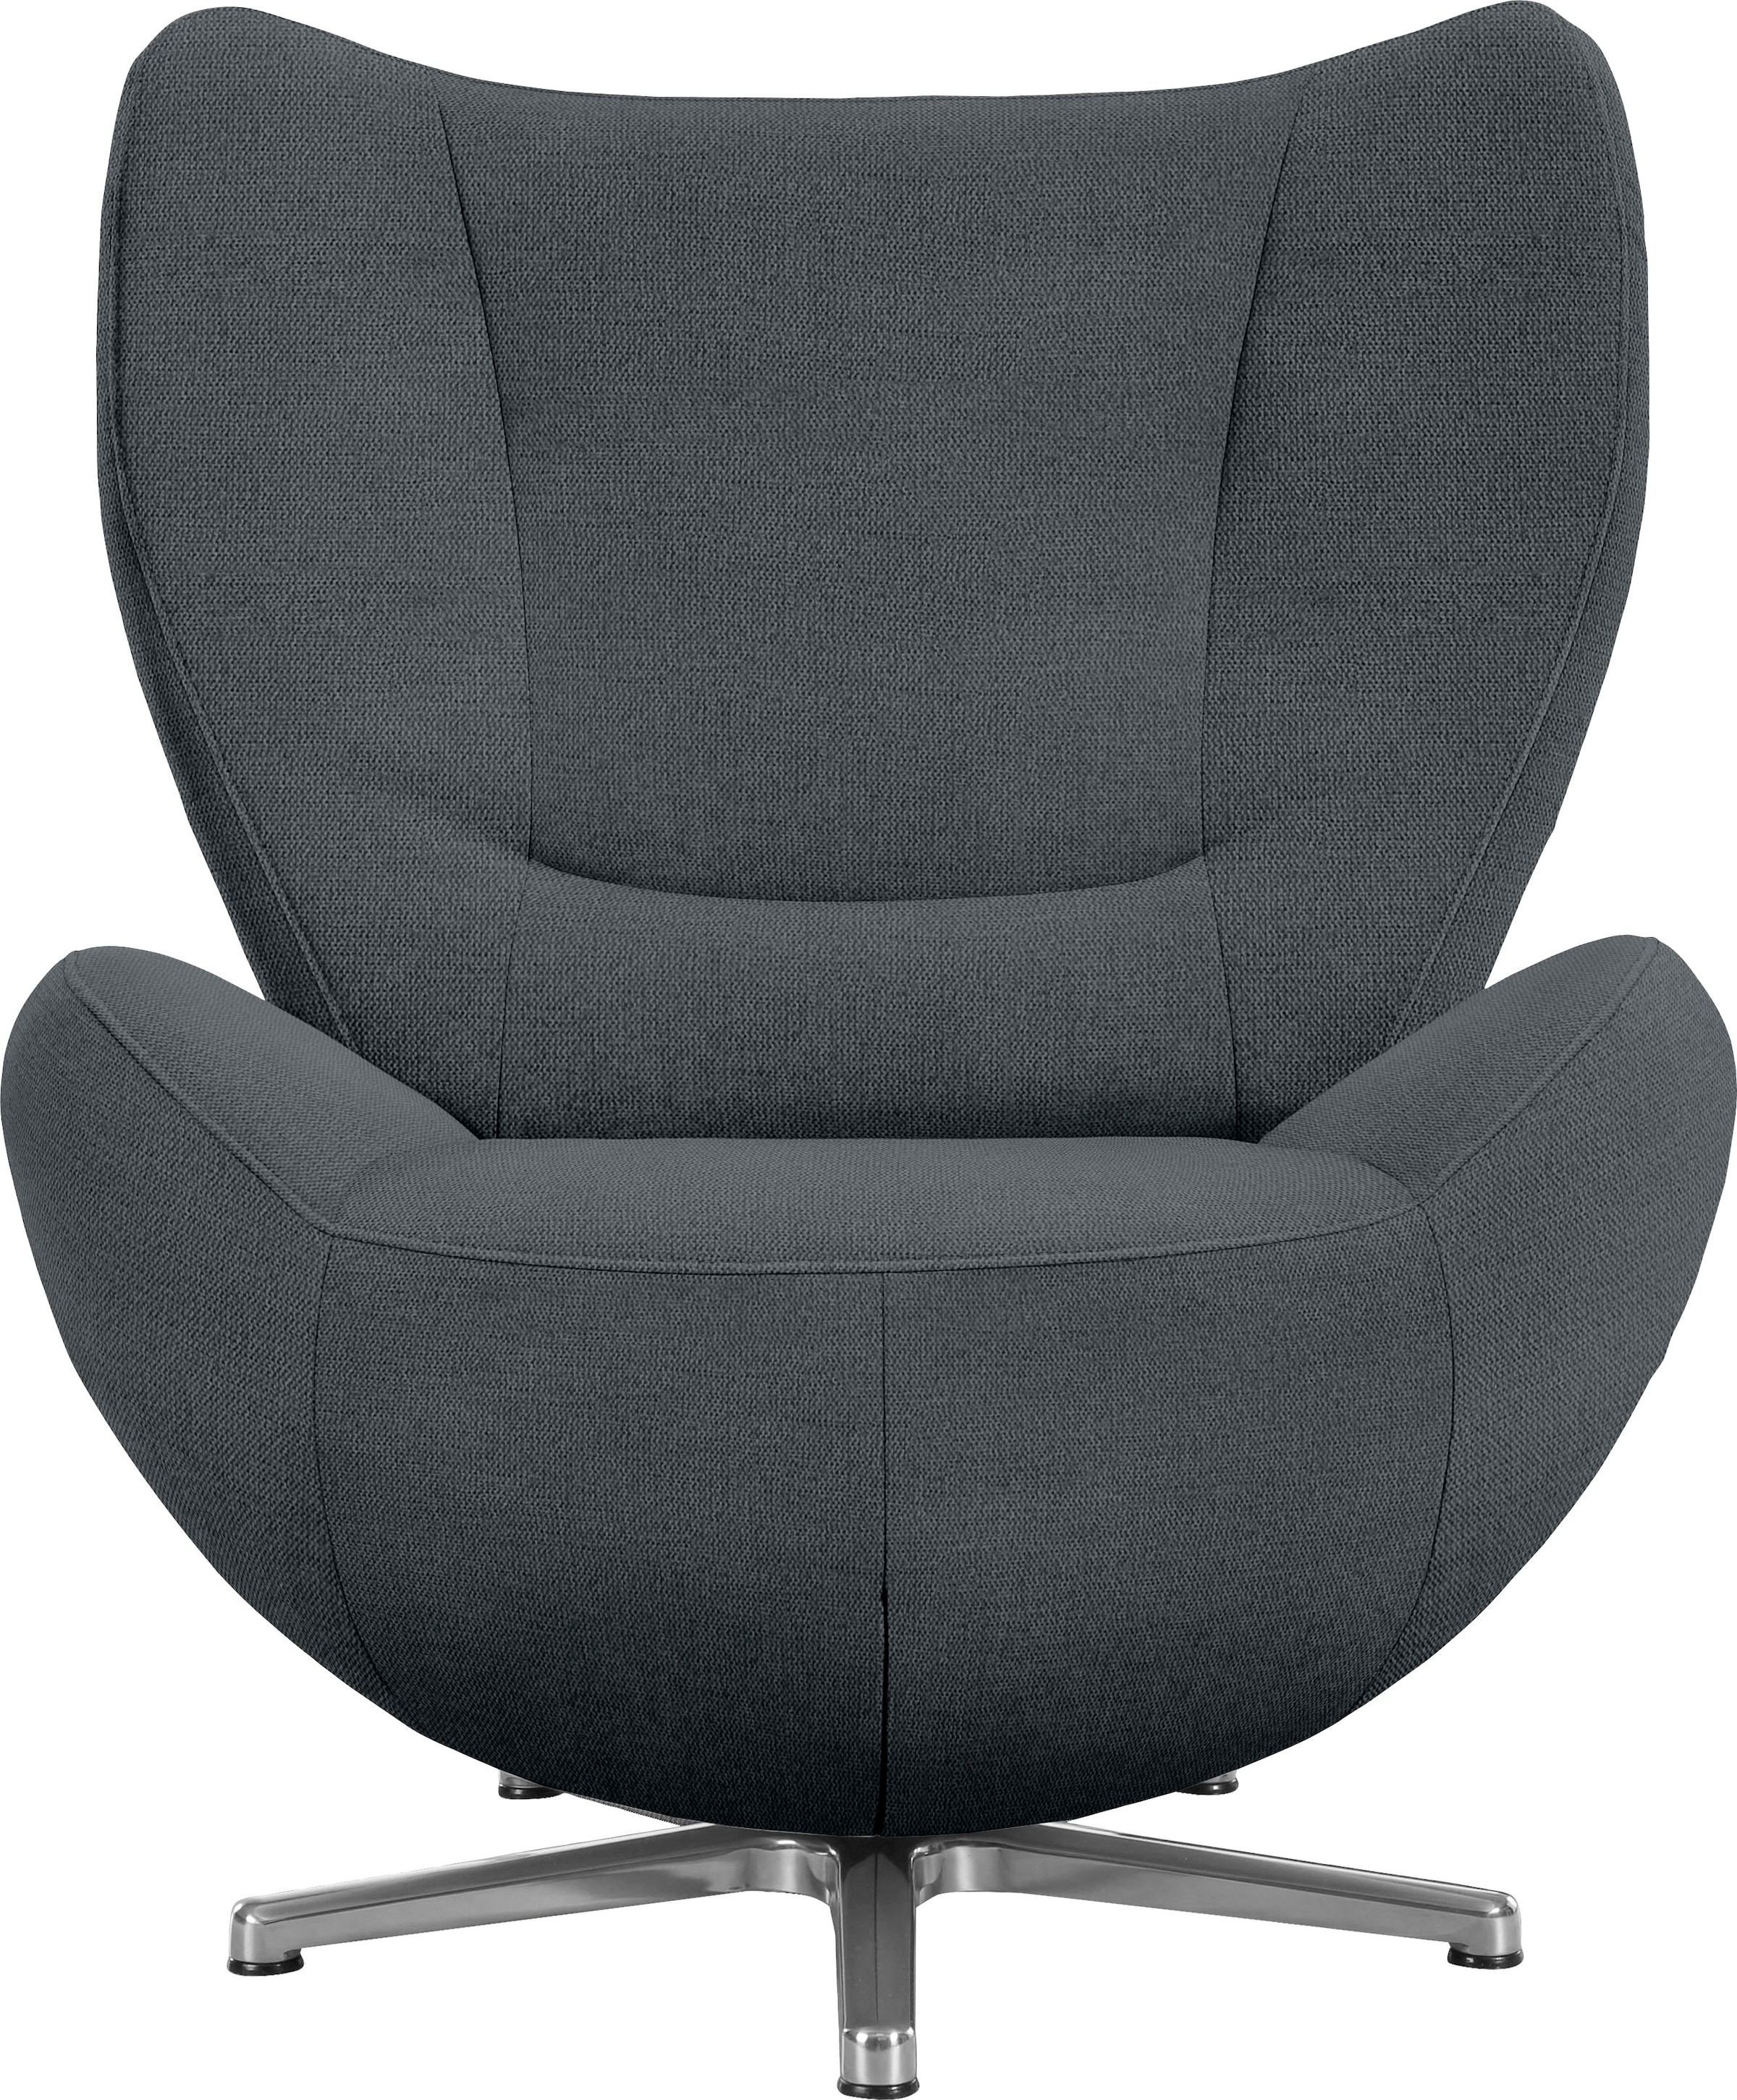 TOM TAILOR HOME Loungesessel "TOM PURE", mit Metall-Drehfuß in Chrom